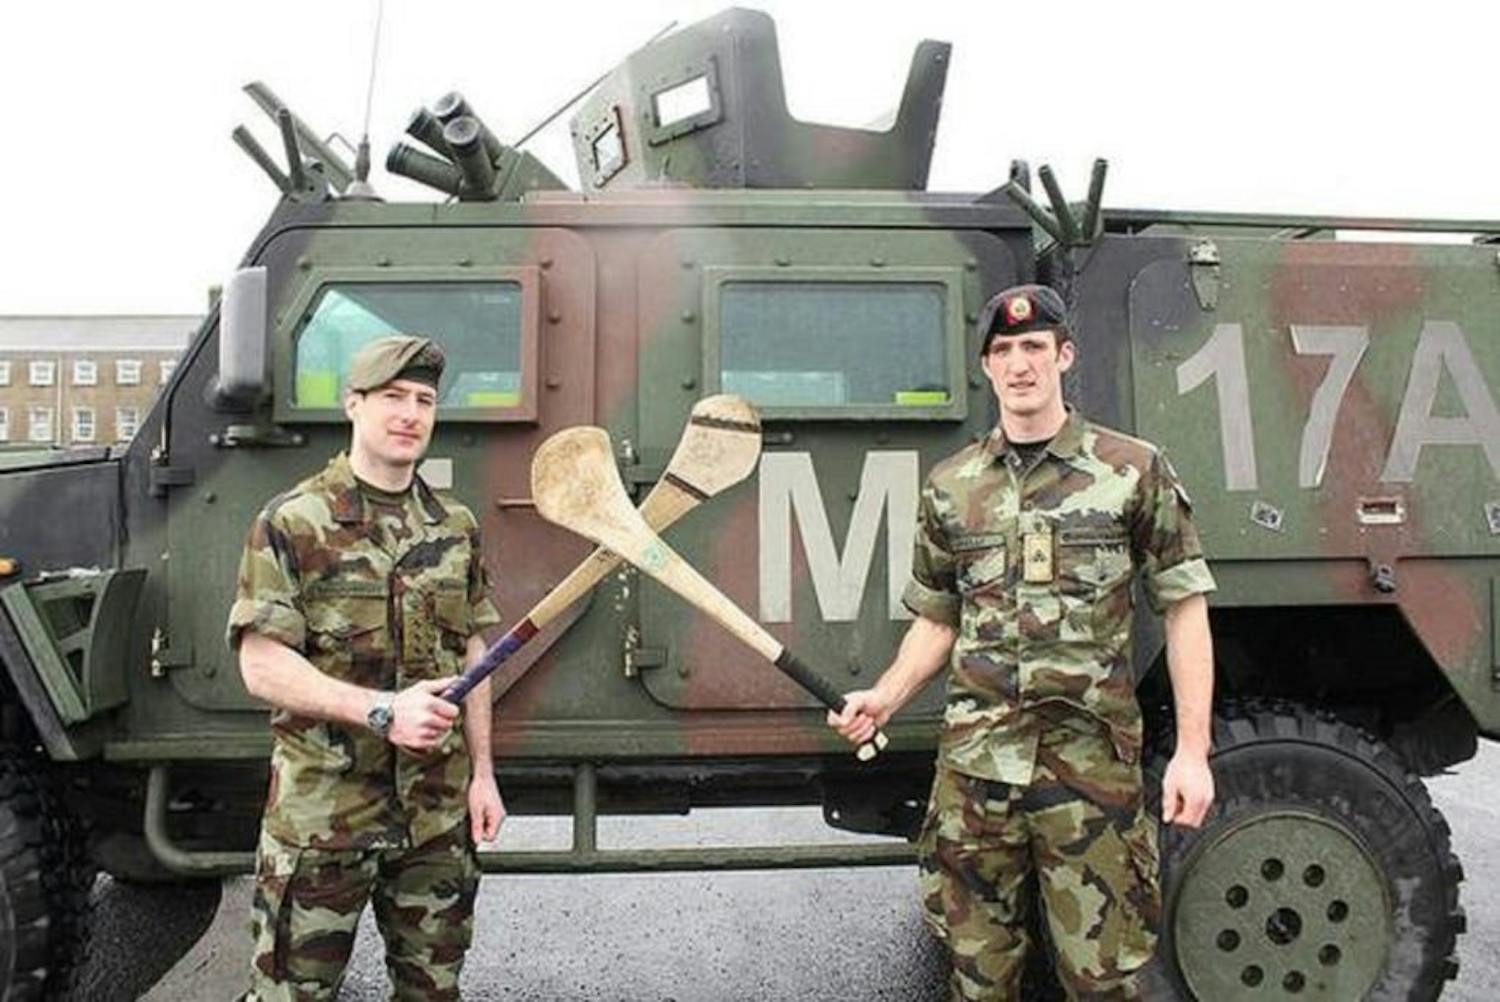 Colin Fennelly on life in the army and club hopes